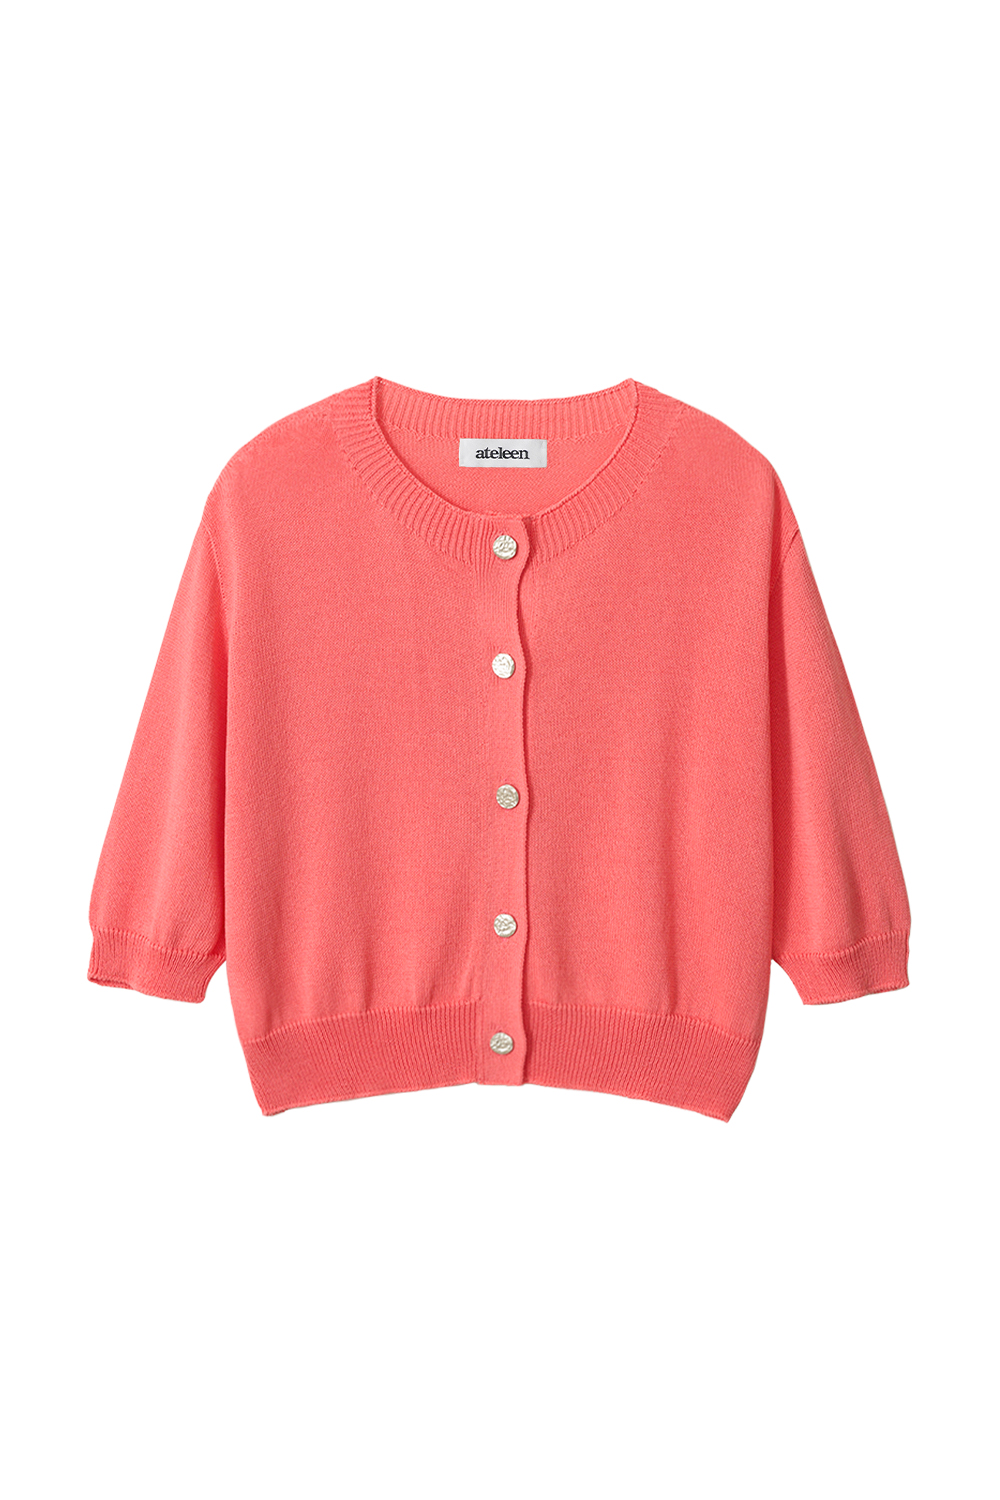 Silver Button Wholegarment Cardigan (Coral)